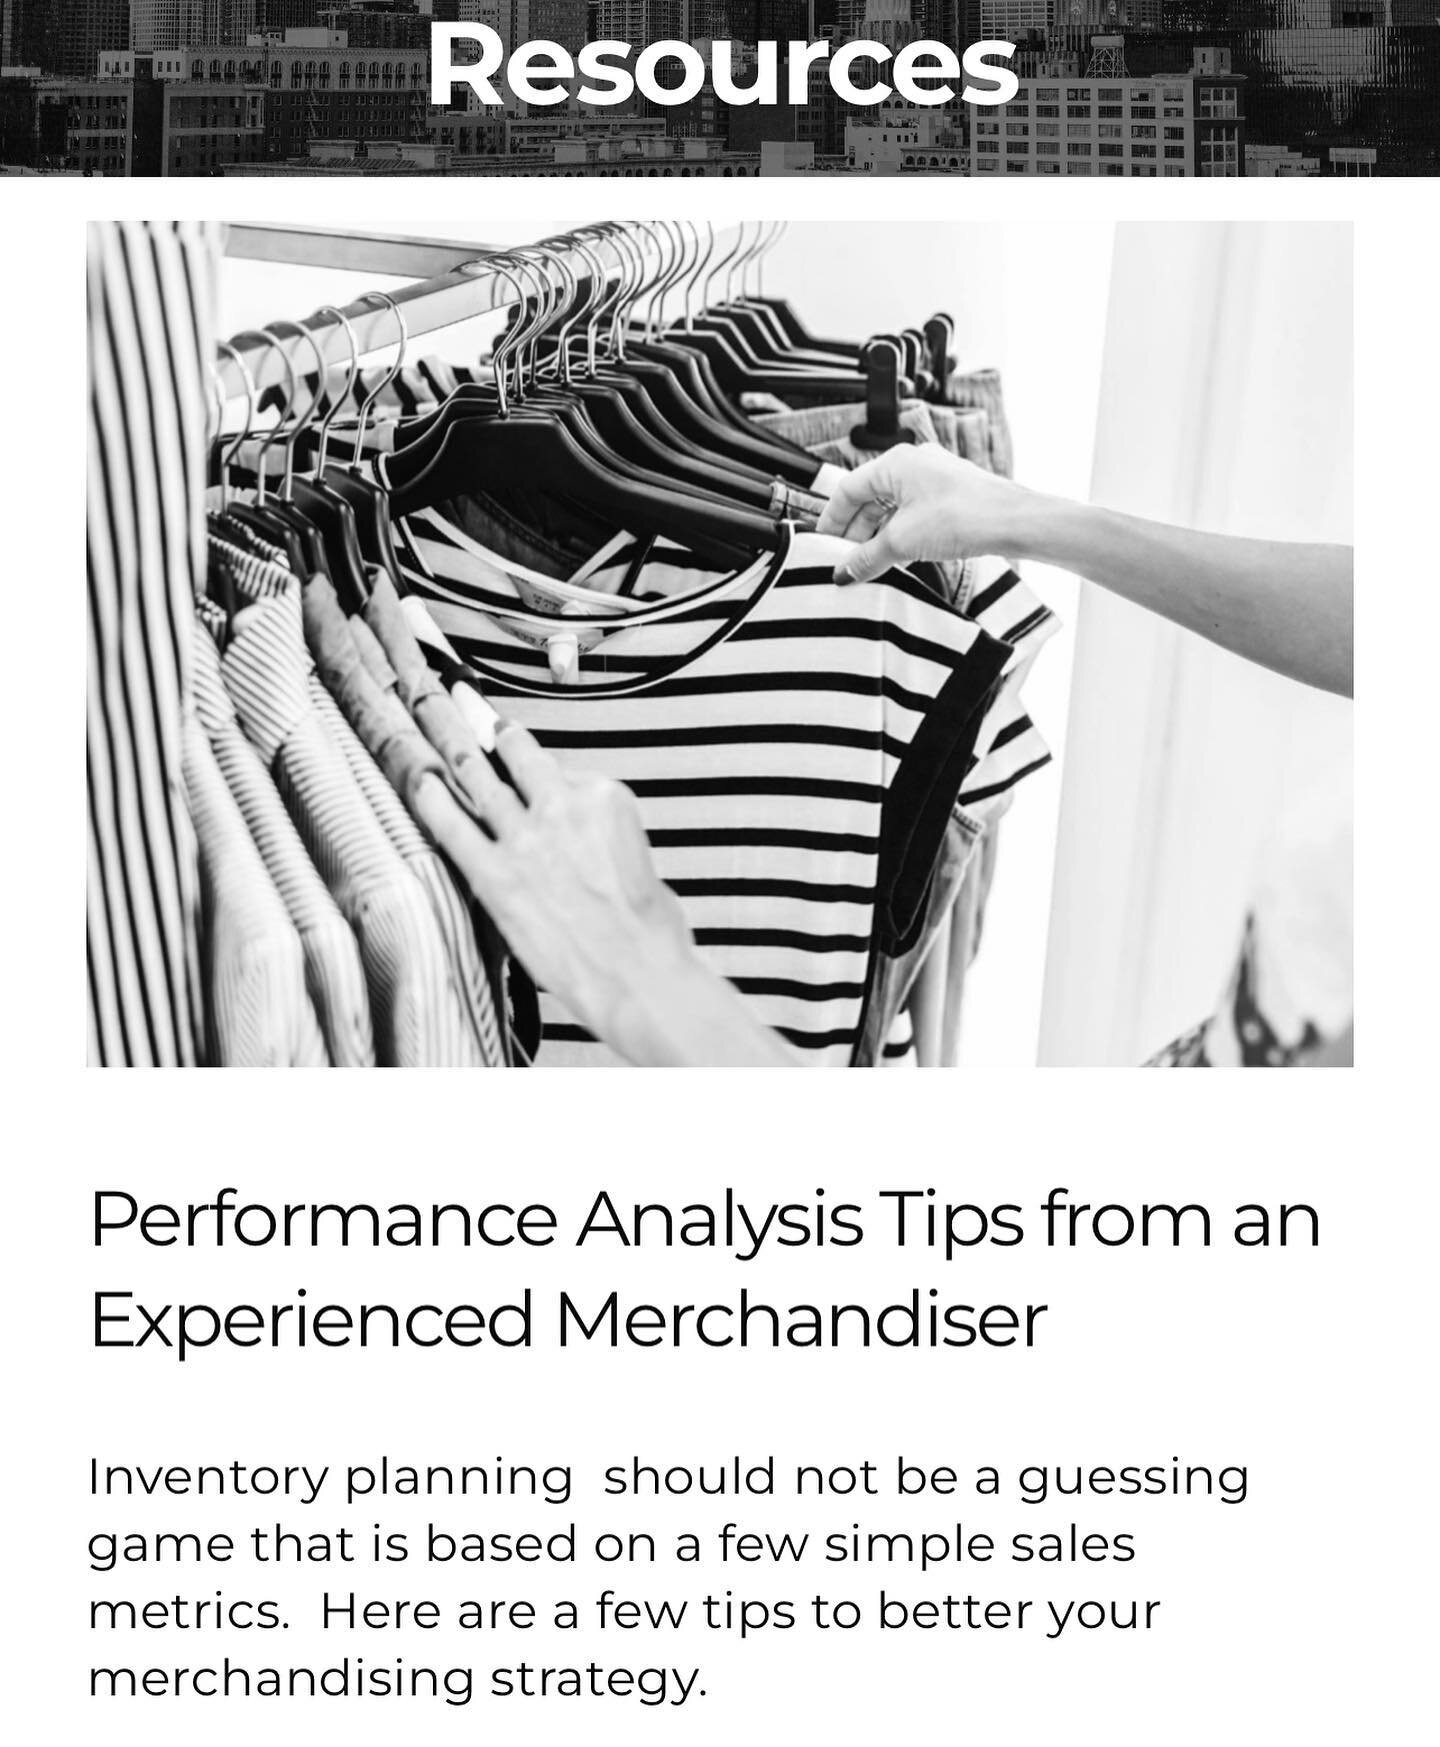 As a fashion brand merchandiser, there are several performance analysis tips you can use to make better decisions, optimize your product offerings, and improve your bottom line.  https://www.thebuyingagency.com/resources/performance-analysis-tips-fro